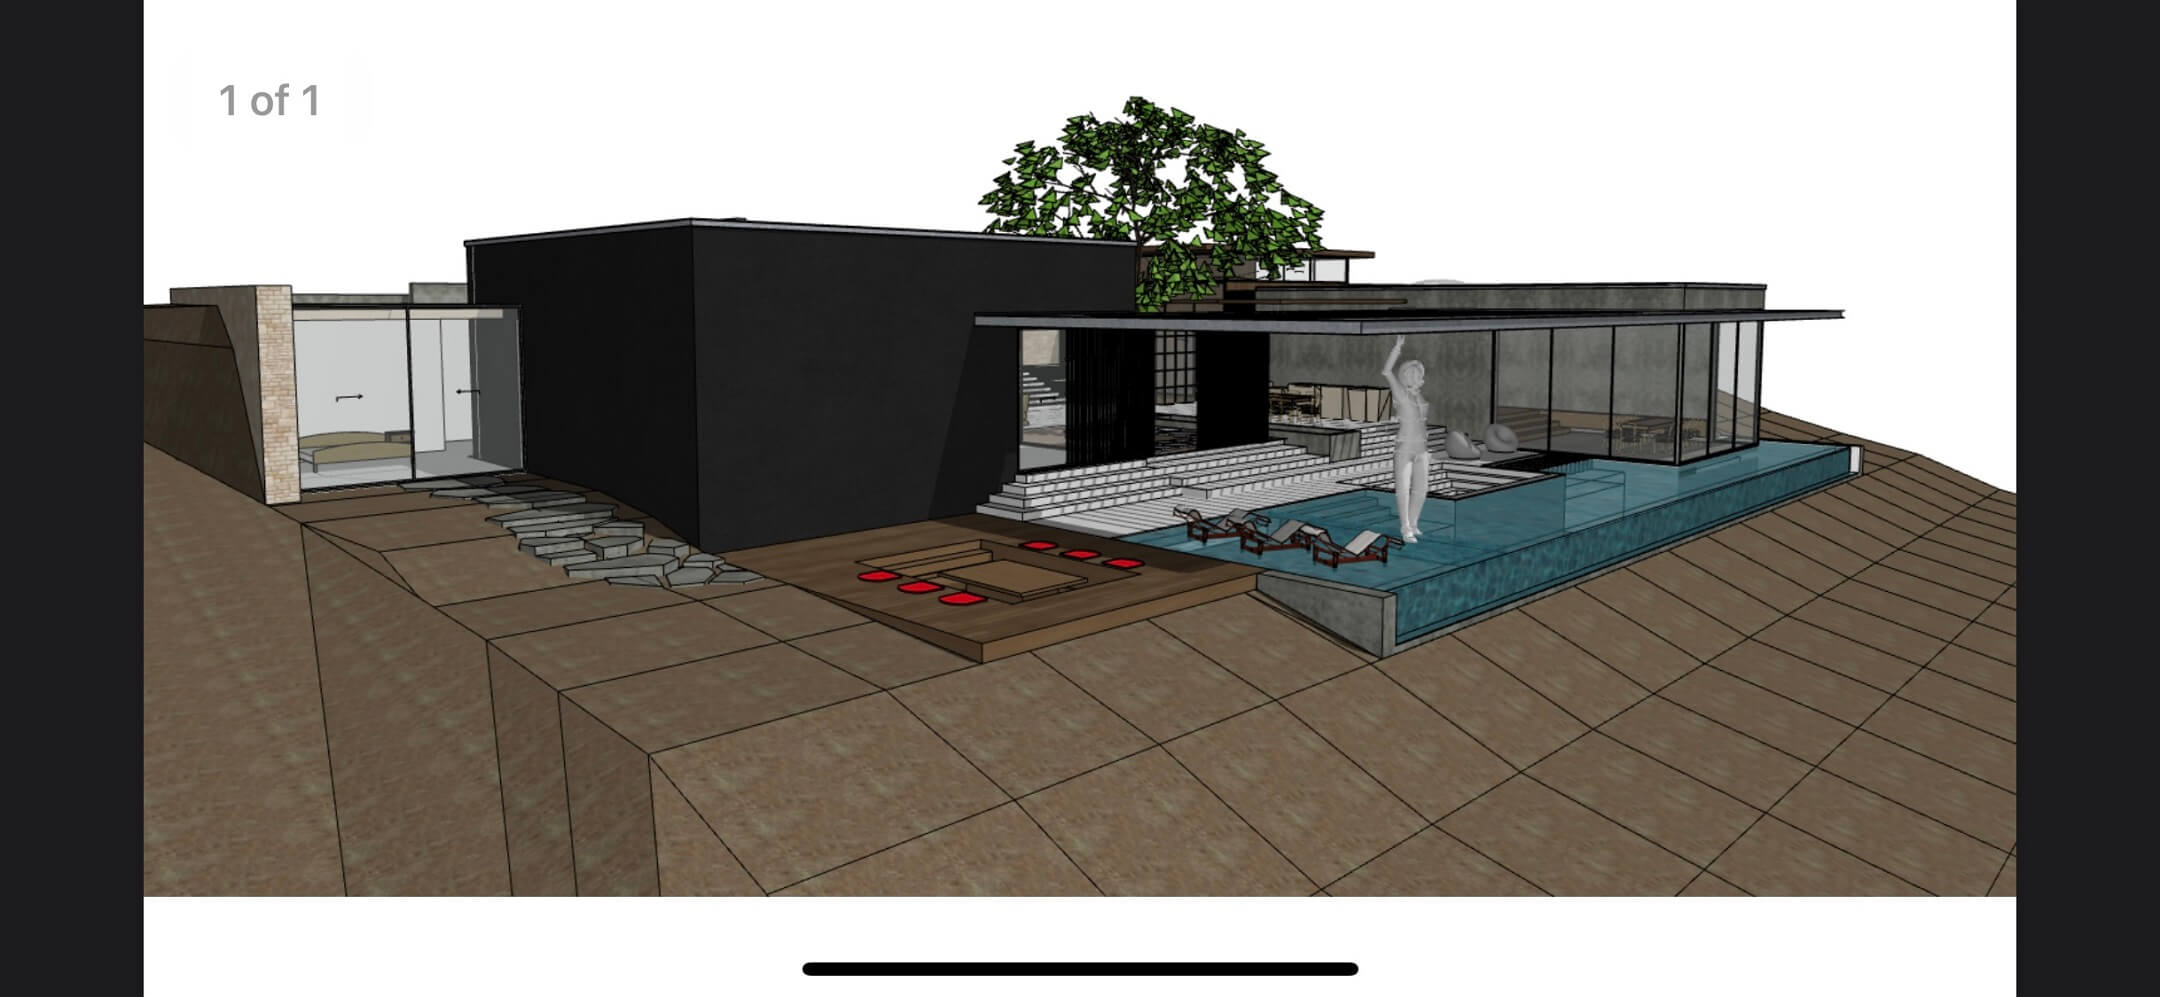 Sketchup Reference for 3D Architectural Rendering